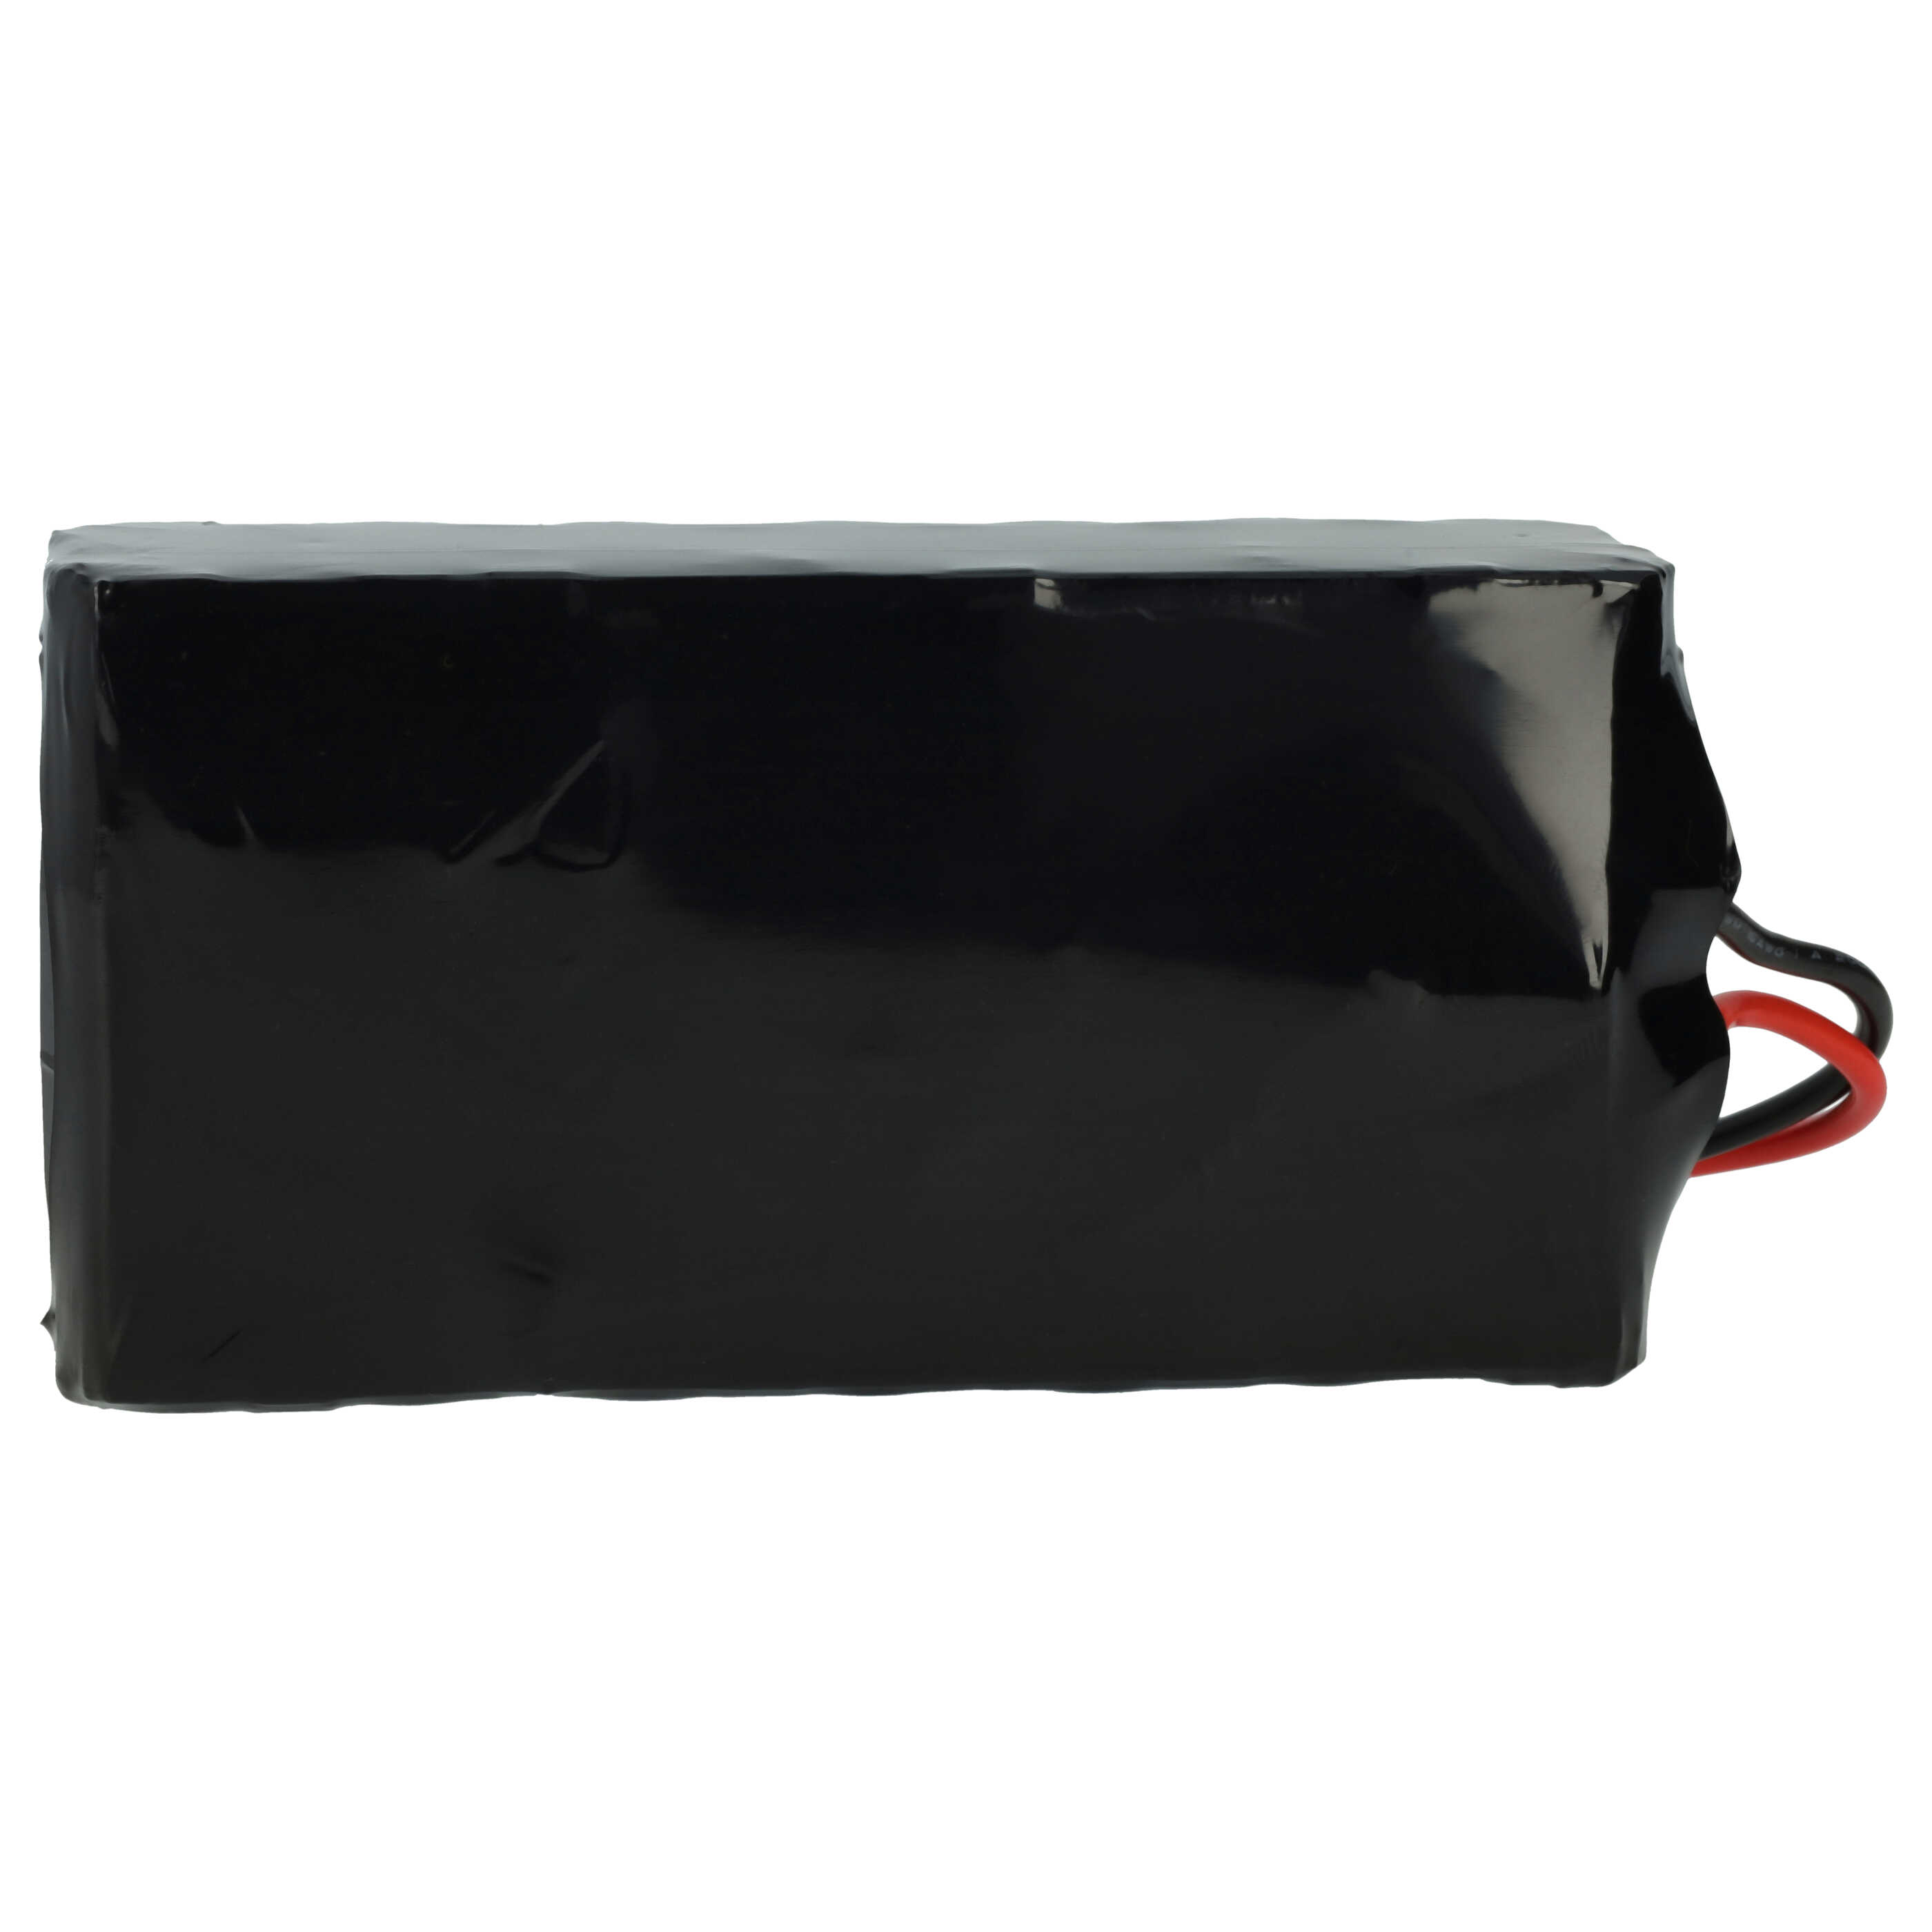 Lawnmower Battery Replacement for Ambrogio 050Z36600A, 050Z38600A, 075Z60900A - 5000mAh 25.9V Li-Ion